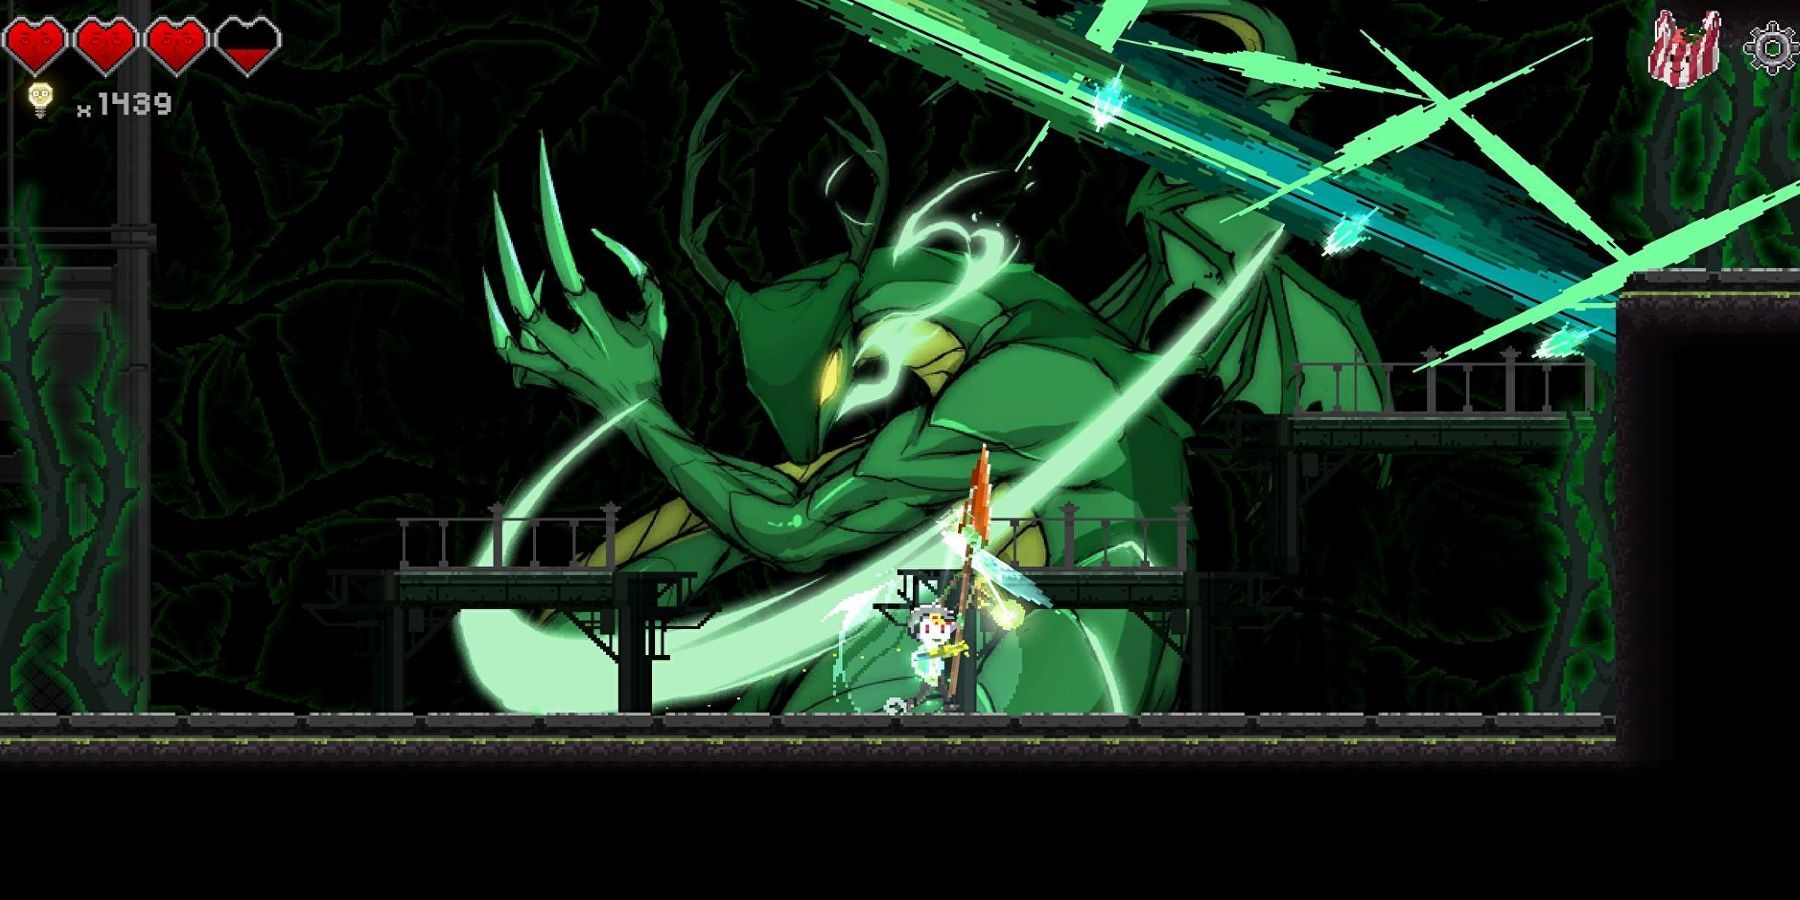 The protagonist of Dungeon Munchies fighting a large green dragon-like monster